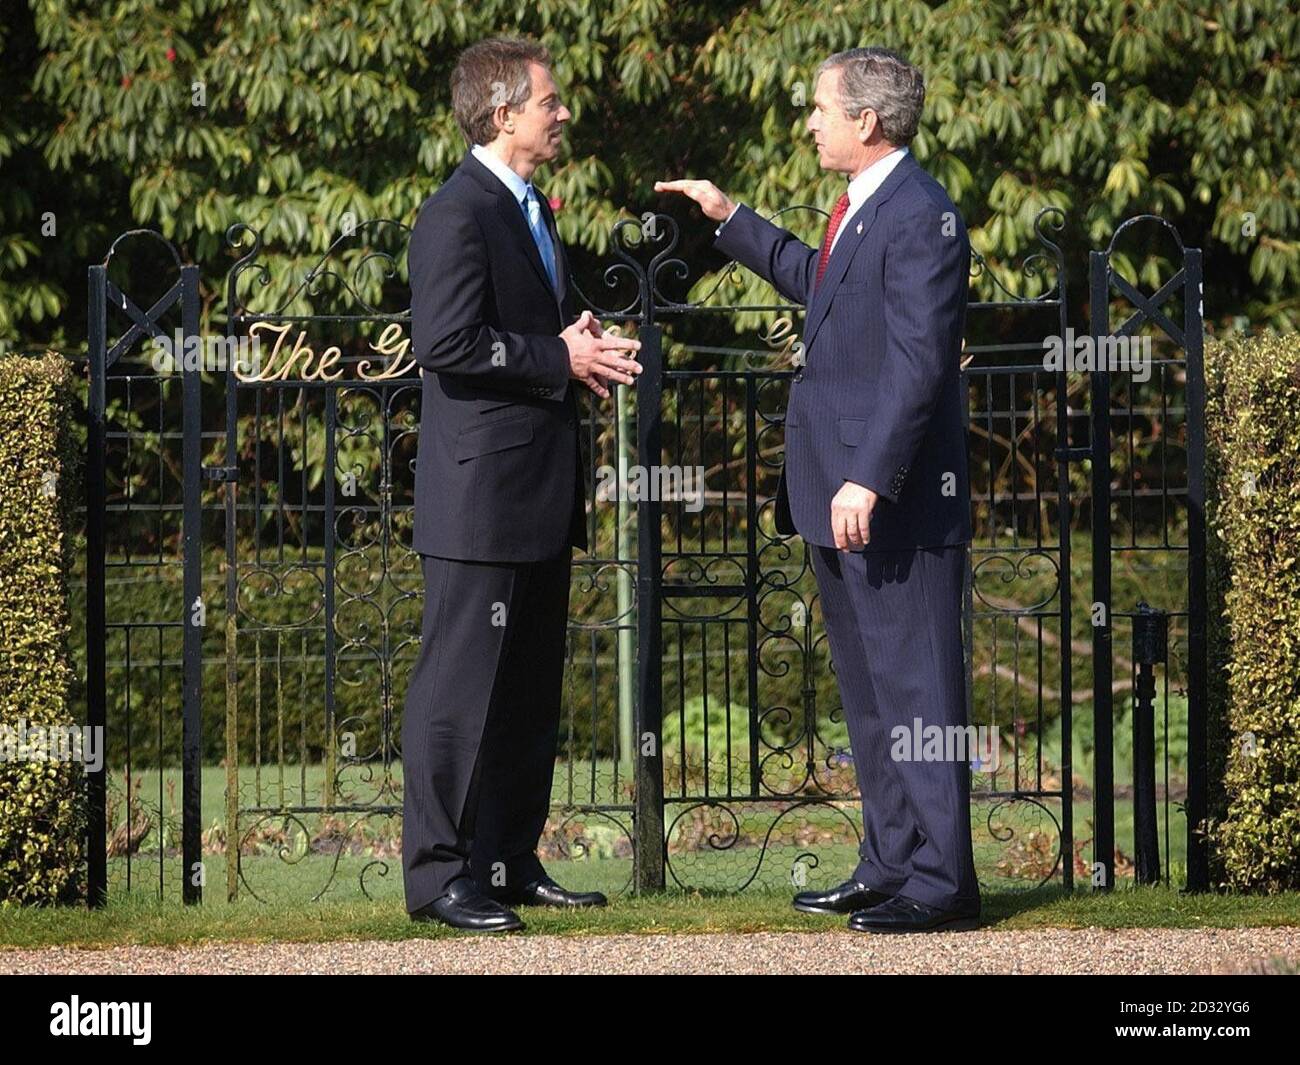 US President George Bush and Prime Minister Tony Blair, at the grounds of Hillsborough Castle in Northern Ireland. During a press conference today, Bush and Blair pledged to hand over power in Iraq to the Iraqi people as 'swiftly as possible'.   * During the meeting they both agreed there would be a 'vital role' for the United Nations in the post-war reconstruction of Iraq and emphasised the need to move as quickly as possible to a new interim Iraqi administration, paving the way to a fully representative government of the country. Stock Photo